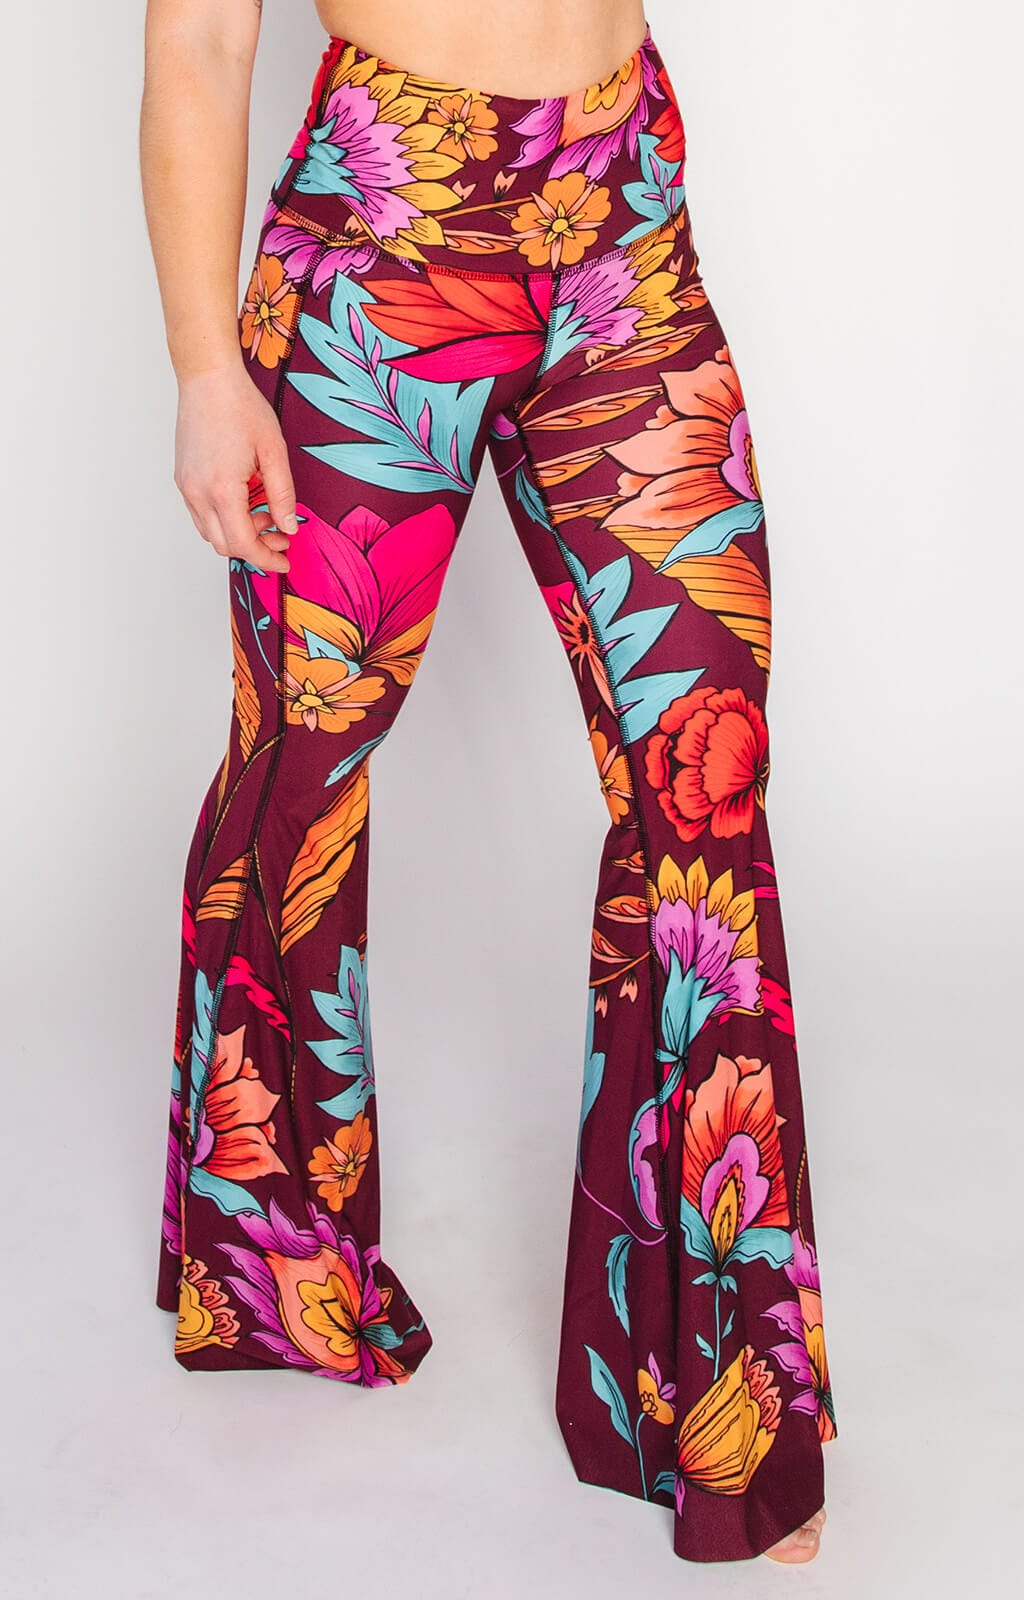 Patterned leggings with a flared leg - red